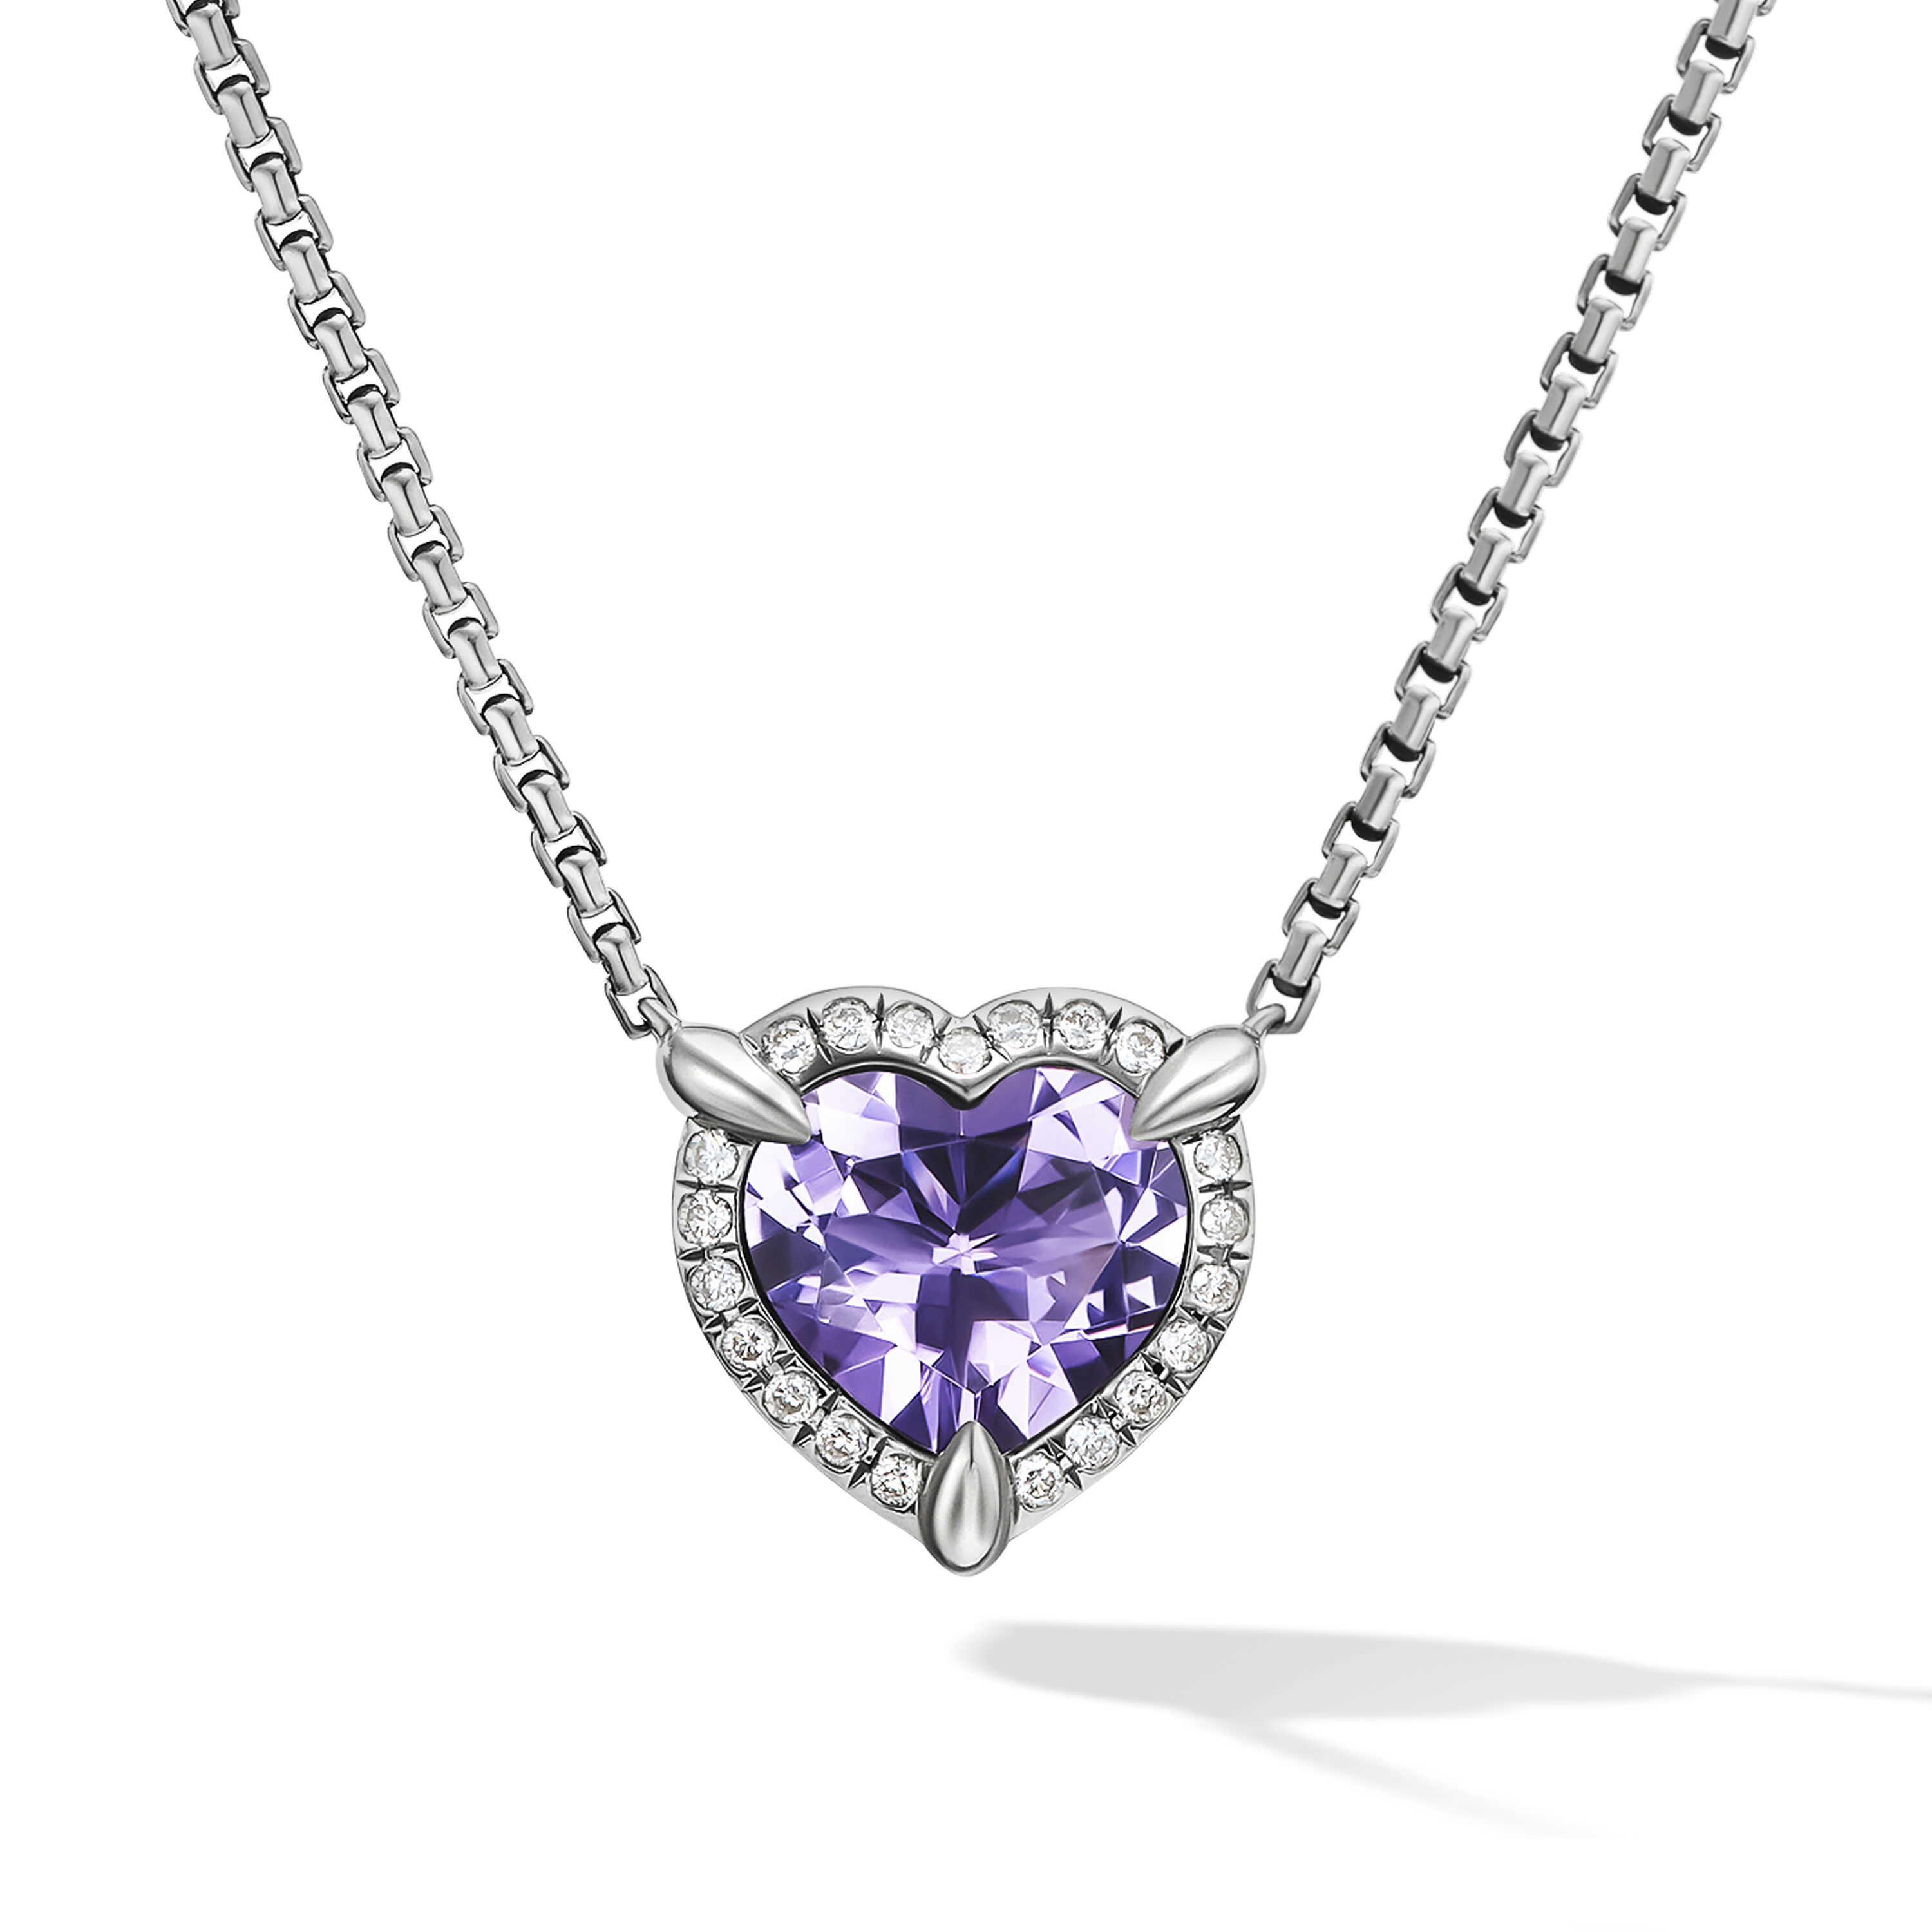 Chatelaine® Heart Pendant Necklace in Sterling Silver with Amethyst and Diamonds, 10.3mm